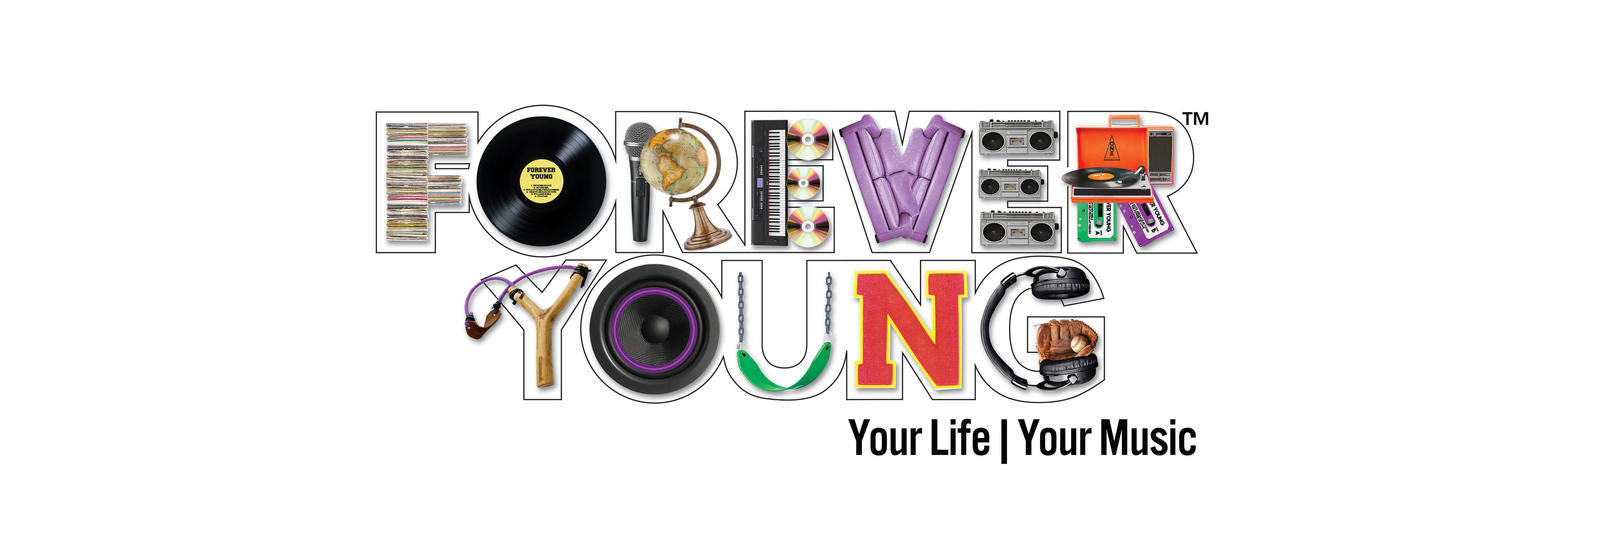 Forever Young - Your Life Your Music